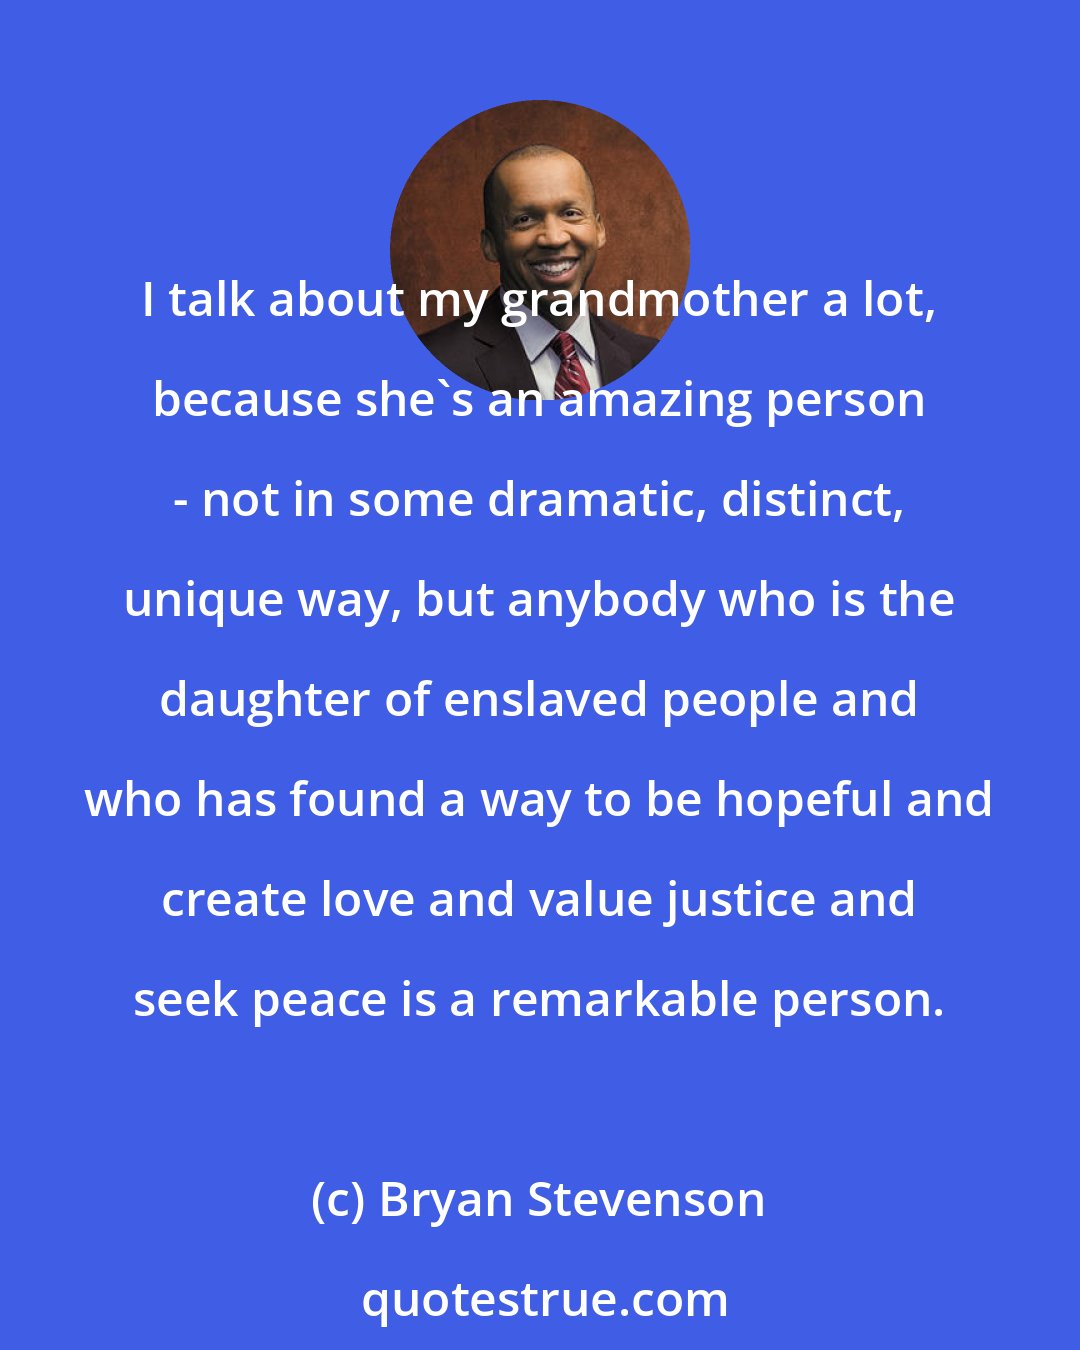 Bryan Stevenson: I talk about my grandmother a lot, because she's an amazing person - not in some dramatic, distinct, unique way, but anybody who is the daughter of enslaved people and who has found a way to be hopeful and create love and value justice and seek peace is a remarkable person.